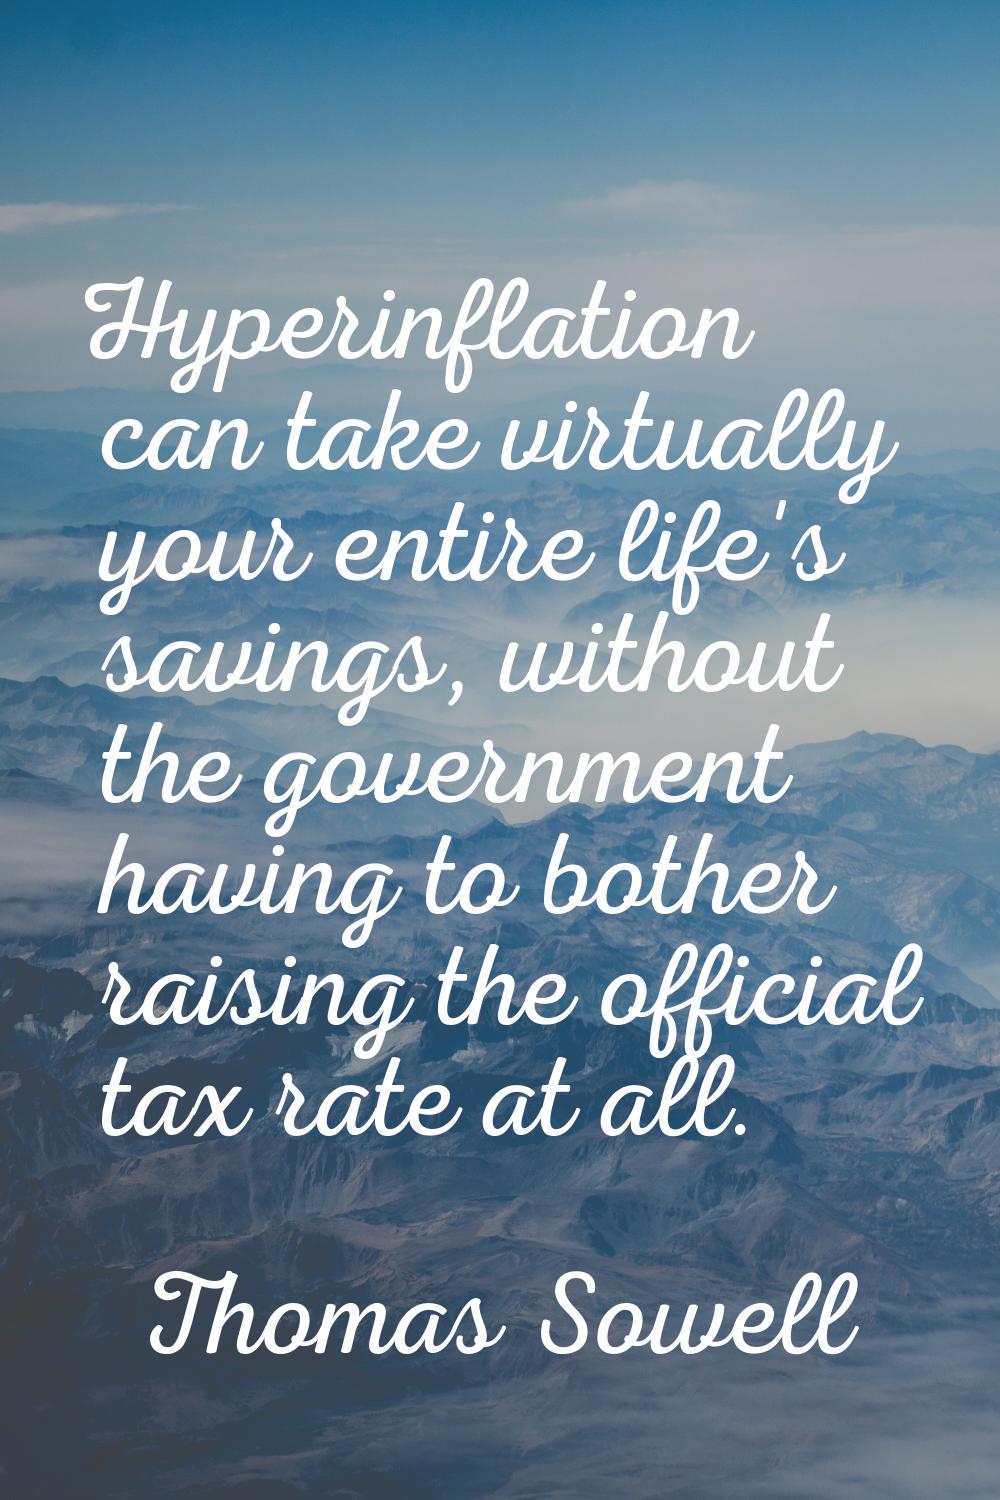 Hyperinflation can take virtually your entire life's savings, without the government having to both